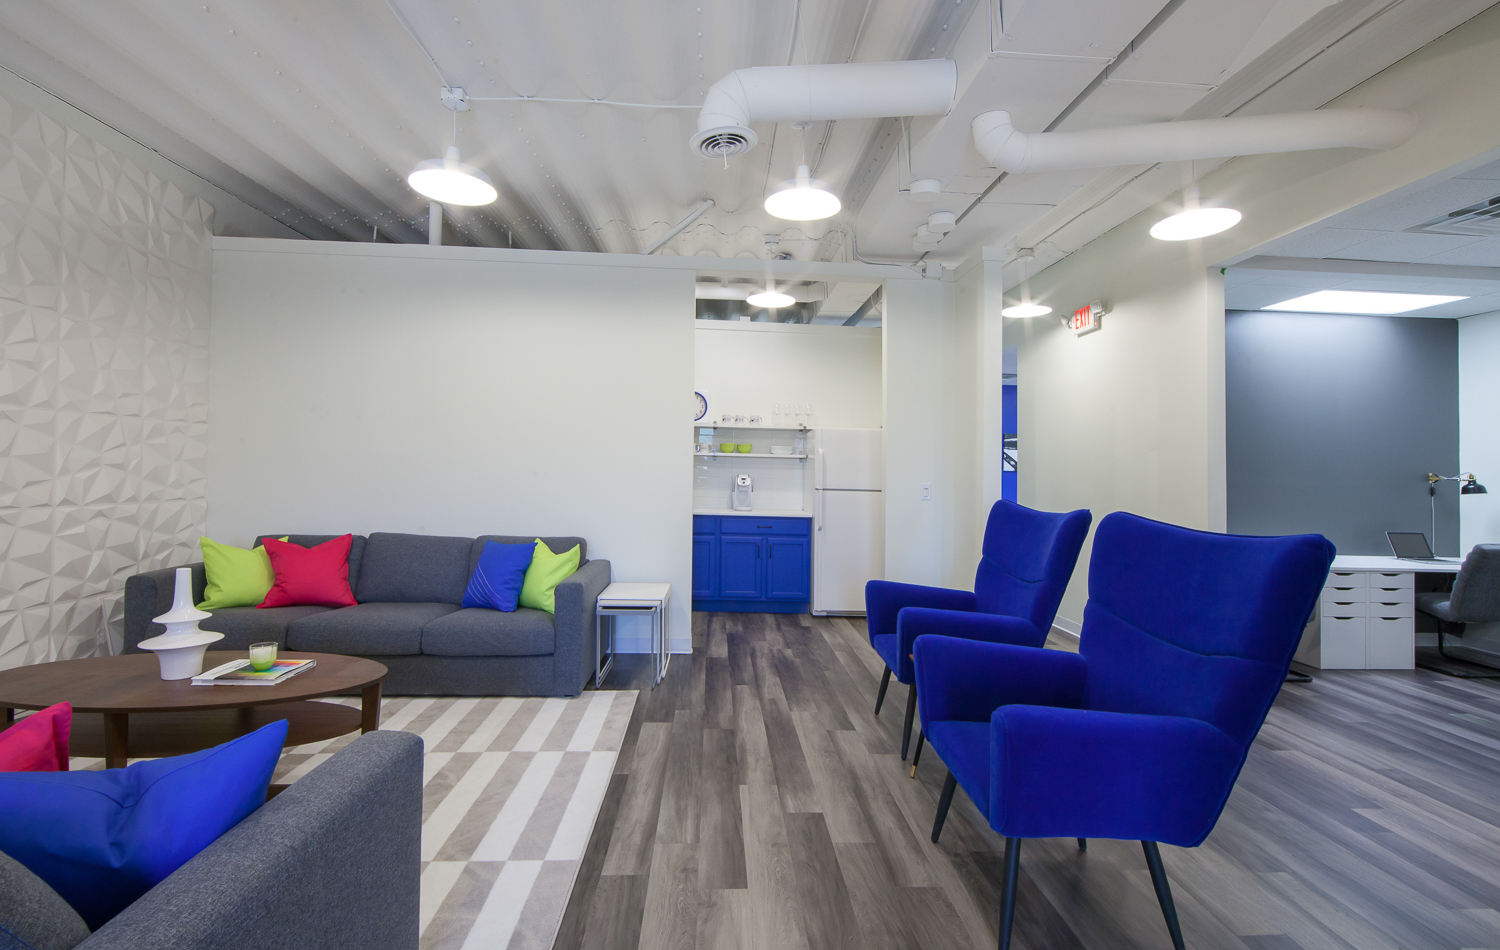 Commercial Office Design - Before and After — Grand Rapids Interior Design  | Fuchsia Design